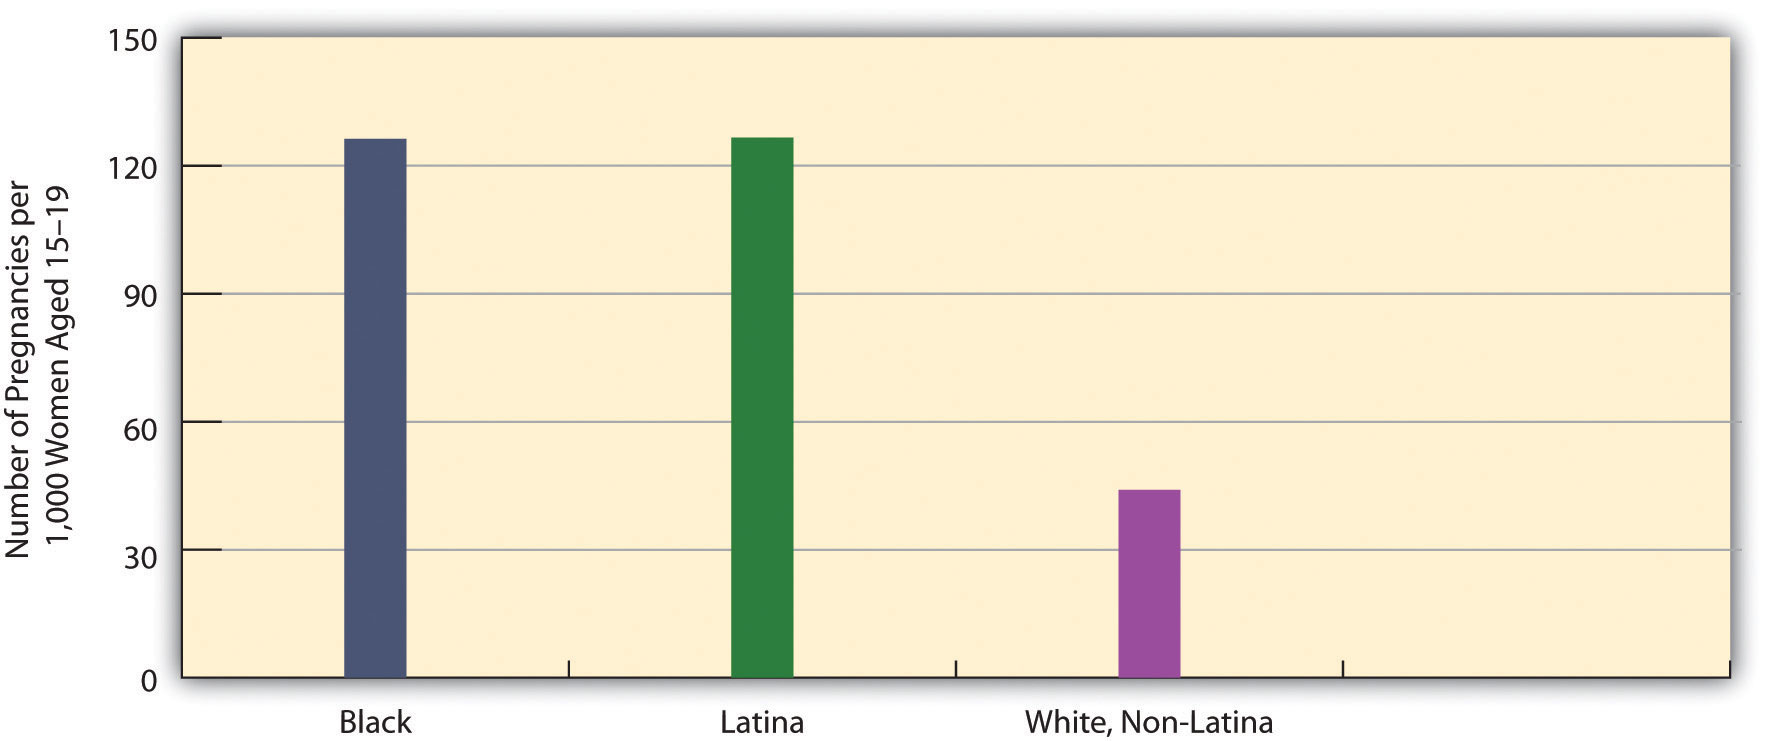 Race/Ethnicity and Teenage Pregnancy shows that most teenage pregnancies are black and latina students